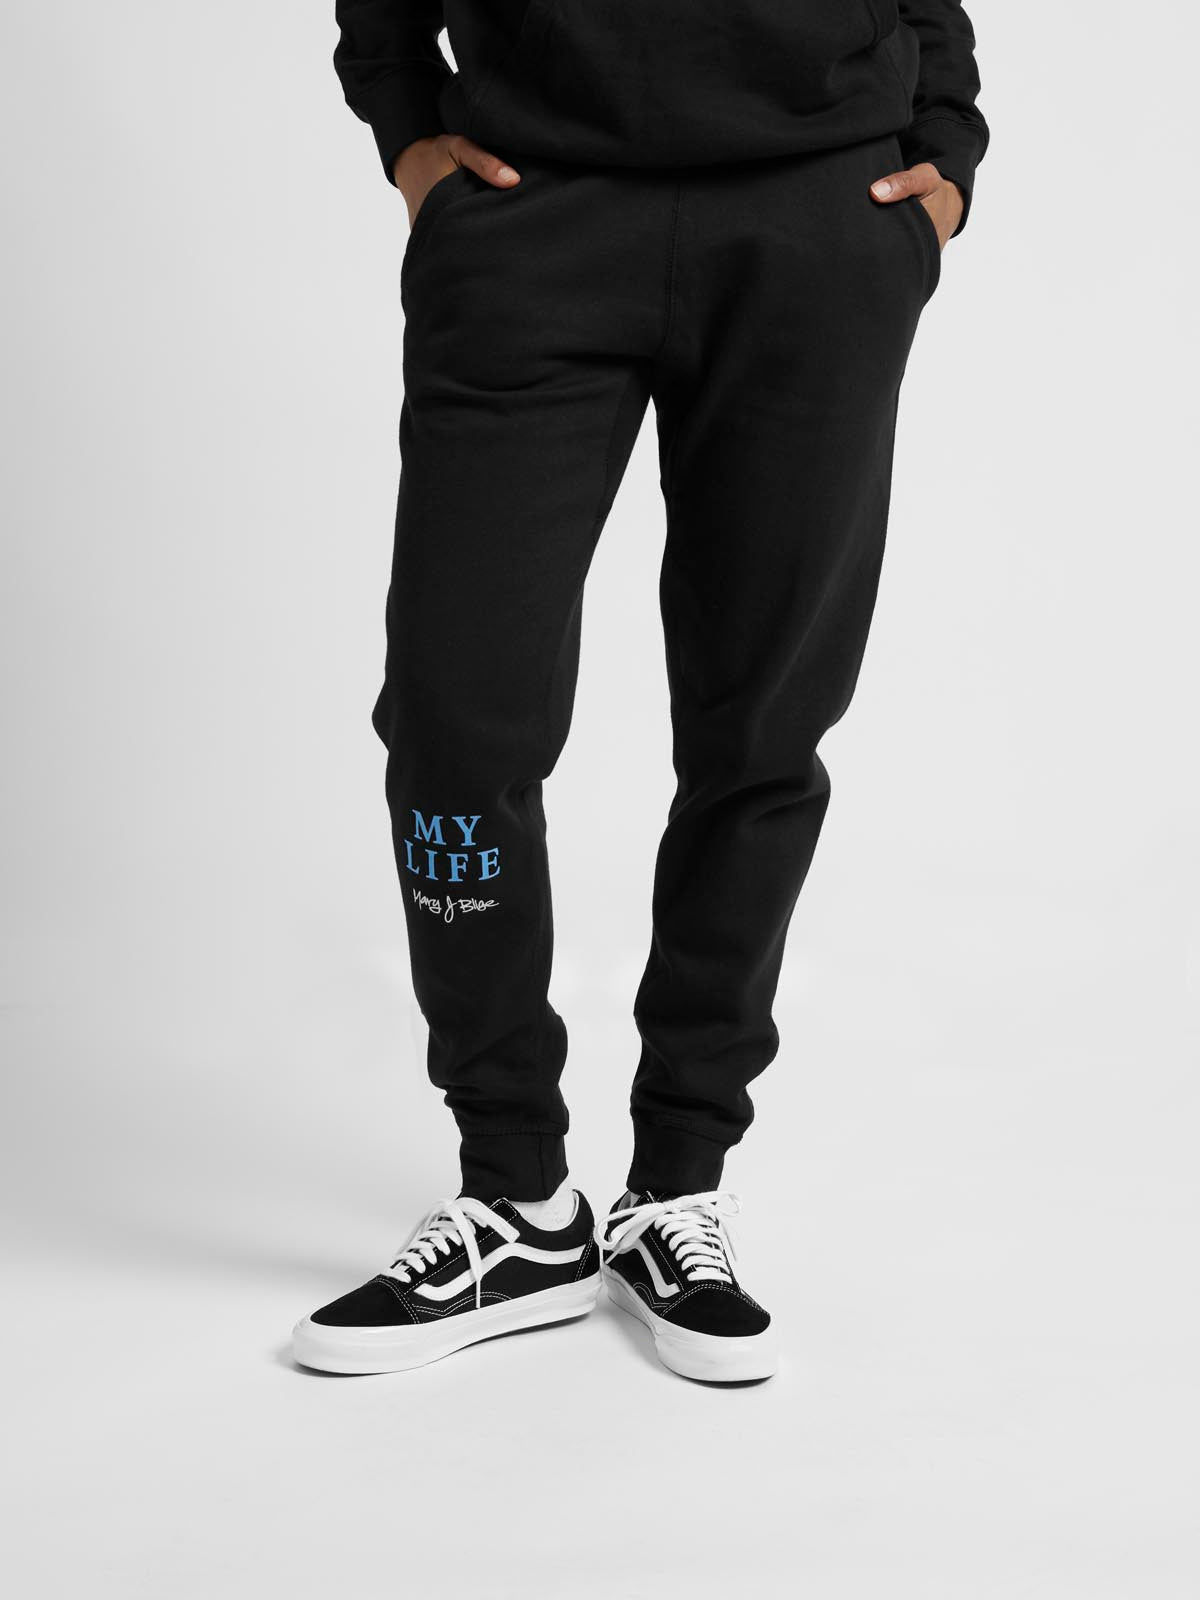 My Life Sweatpants - Mary J. Blige Official Store